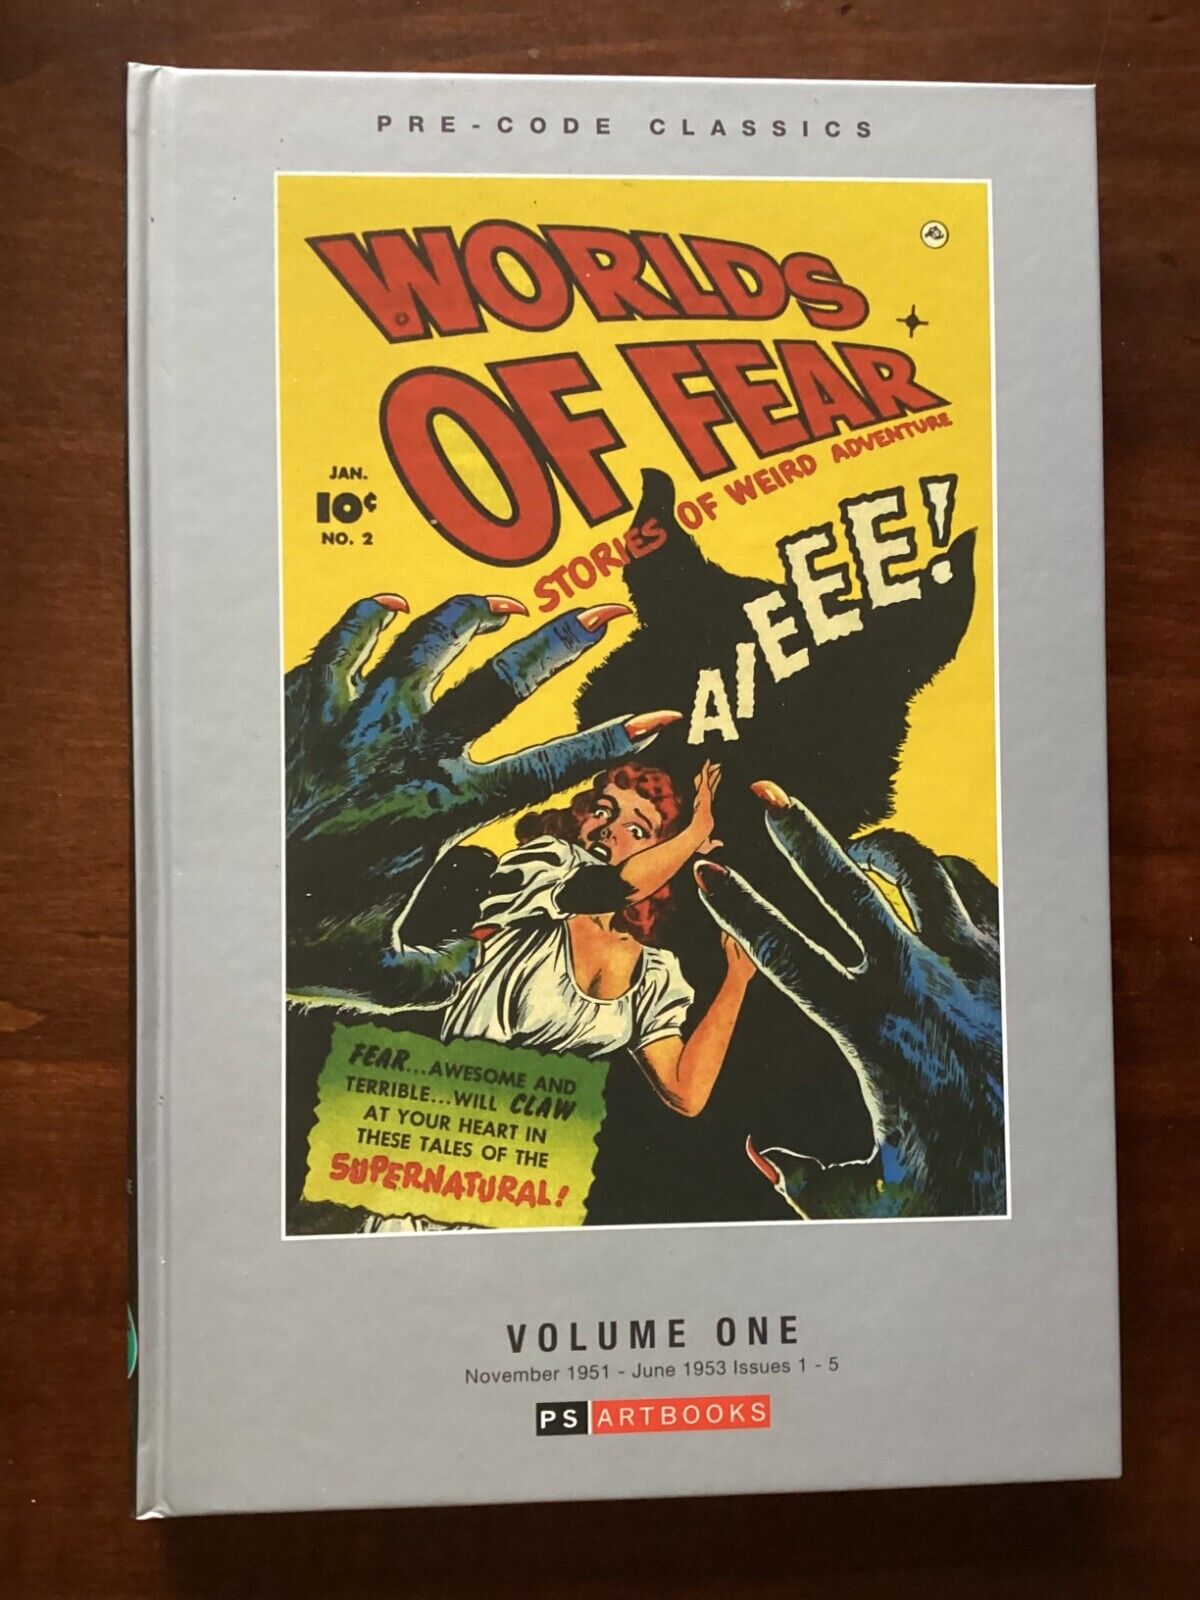 WORLDS BEYOND and WORLDS OF FEAR -  Vol 1 - PRECODE HORROR COMICS - 1951 to 1953